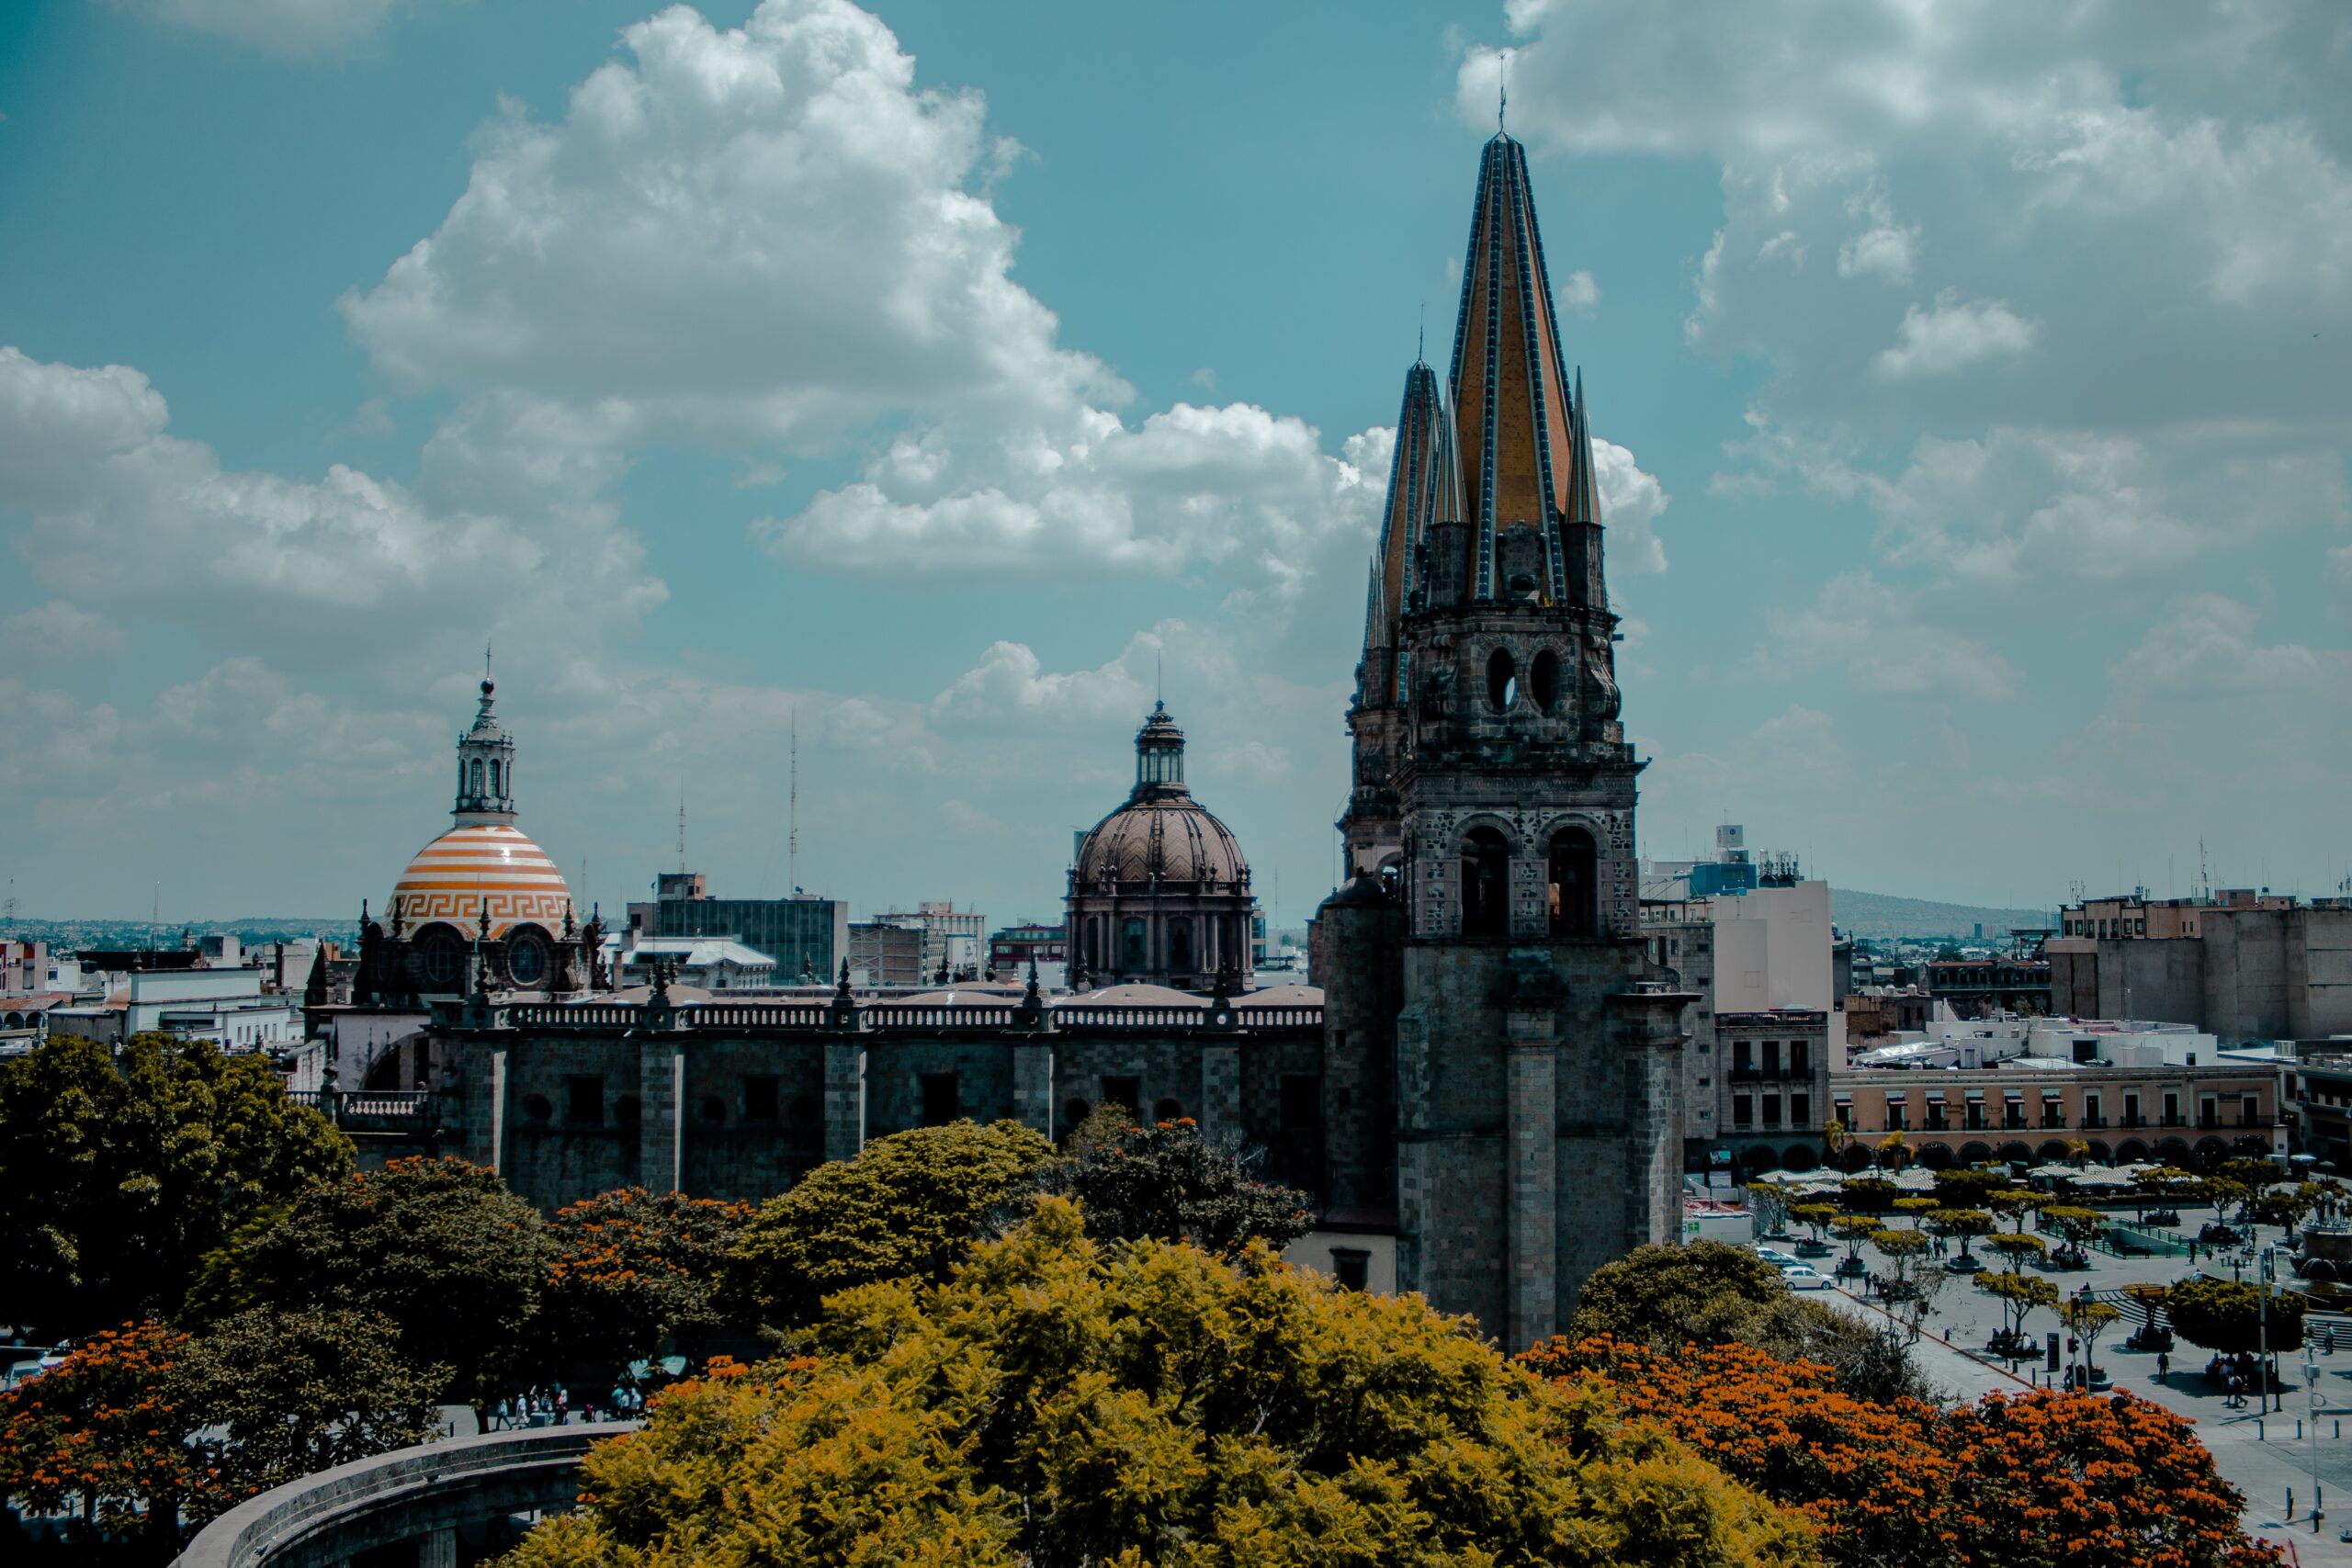 Check out the best times to visit Guadalajara, Mexico to have a safe visit.
pictured: the central city area of Guadalajara, Mexico during fall with historical buildings and cloudy skies 